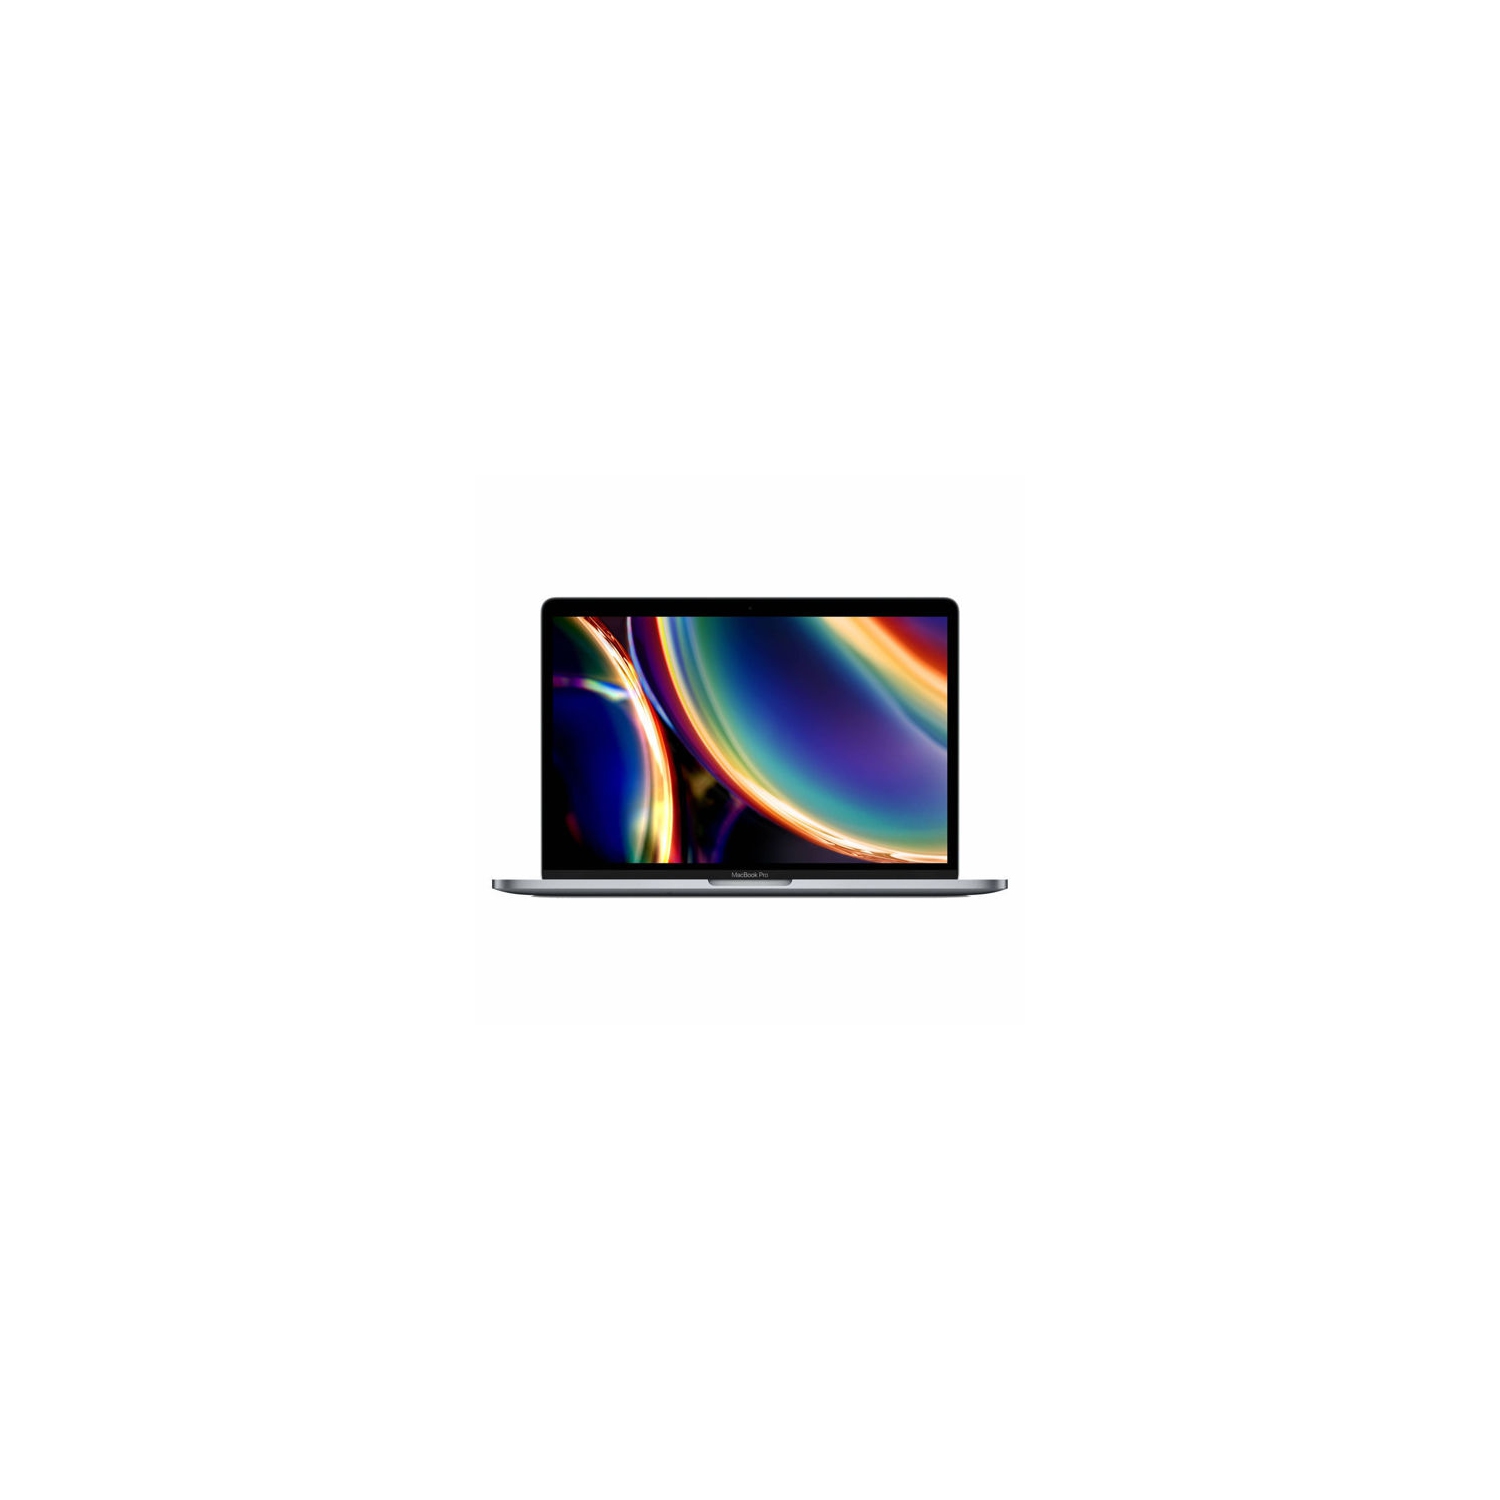 Refurbished (Excellent) - Apple MacBook Pro 13.3" with Touch Bar (2020) - Space Grey (Intel i5 2.0GHz Quad Core / 512GB SSD / 16GB RAM) - Certified Refurbished